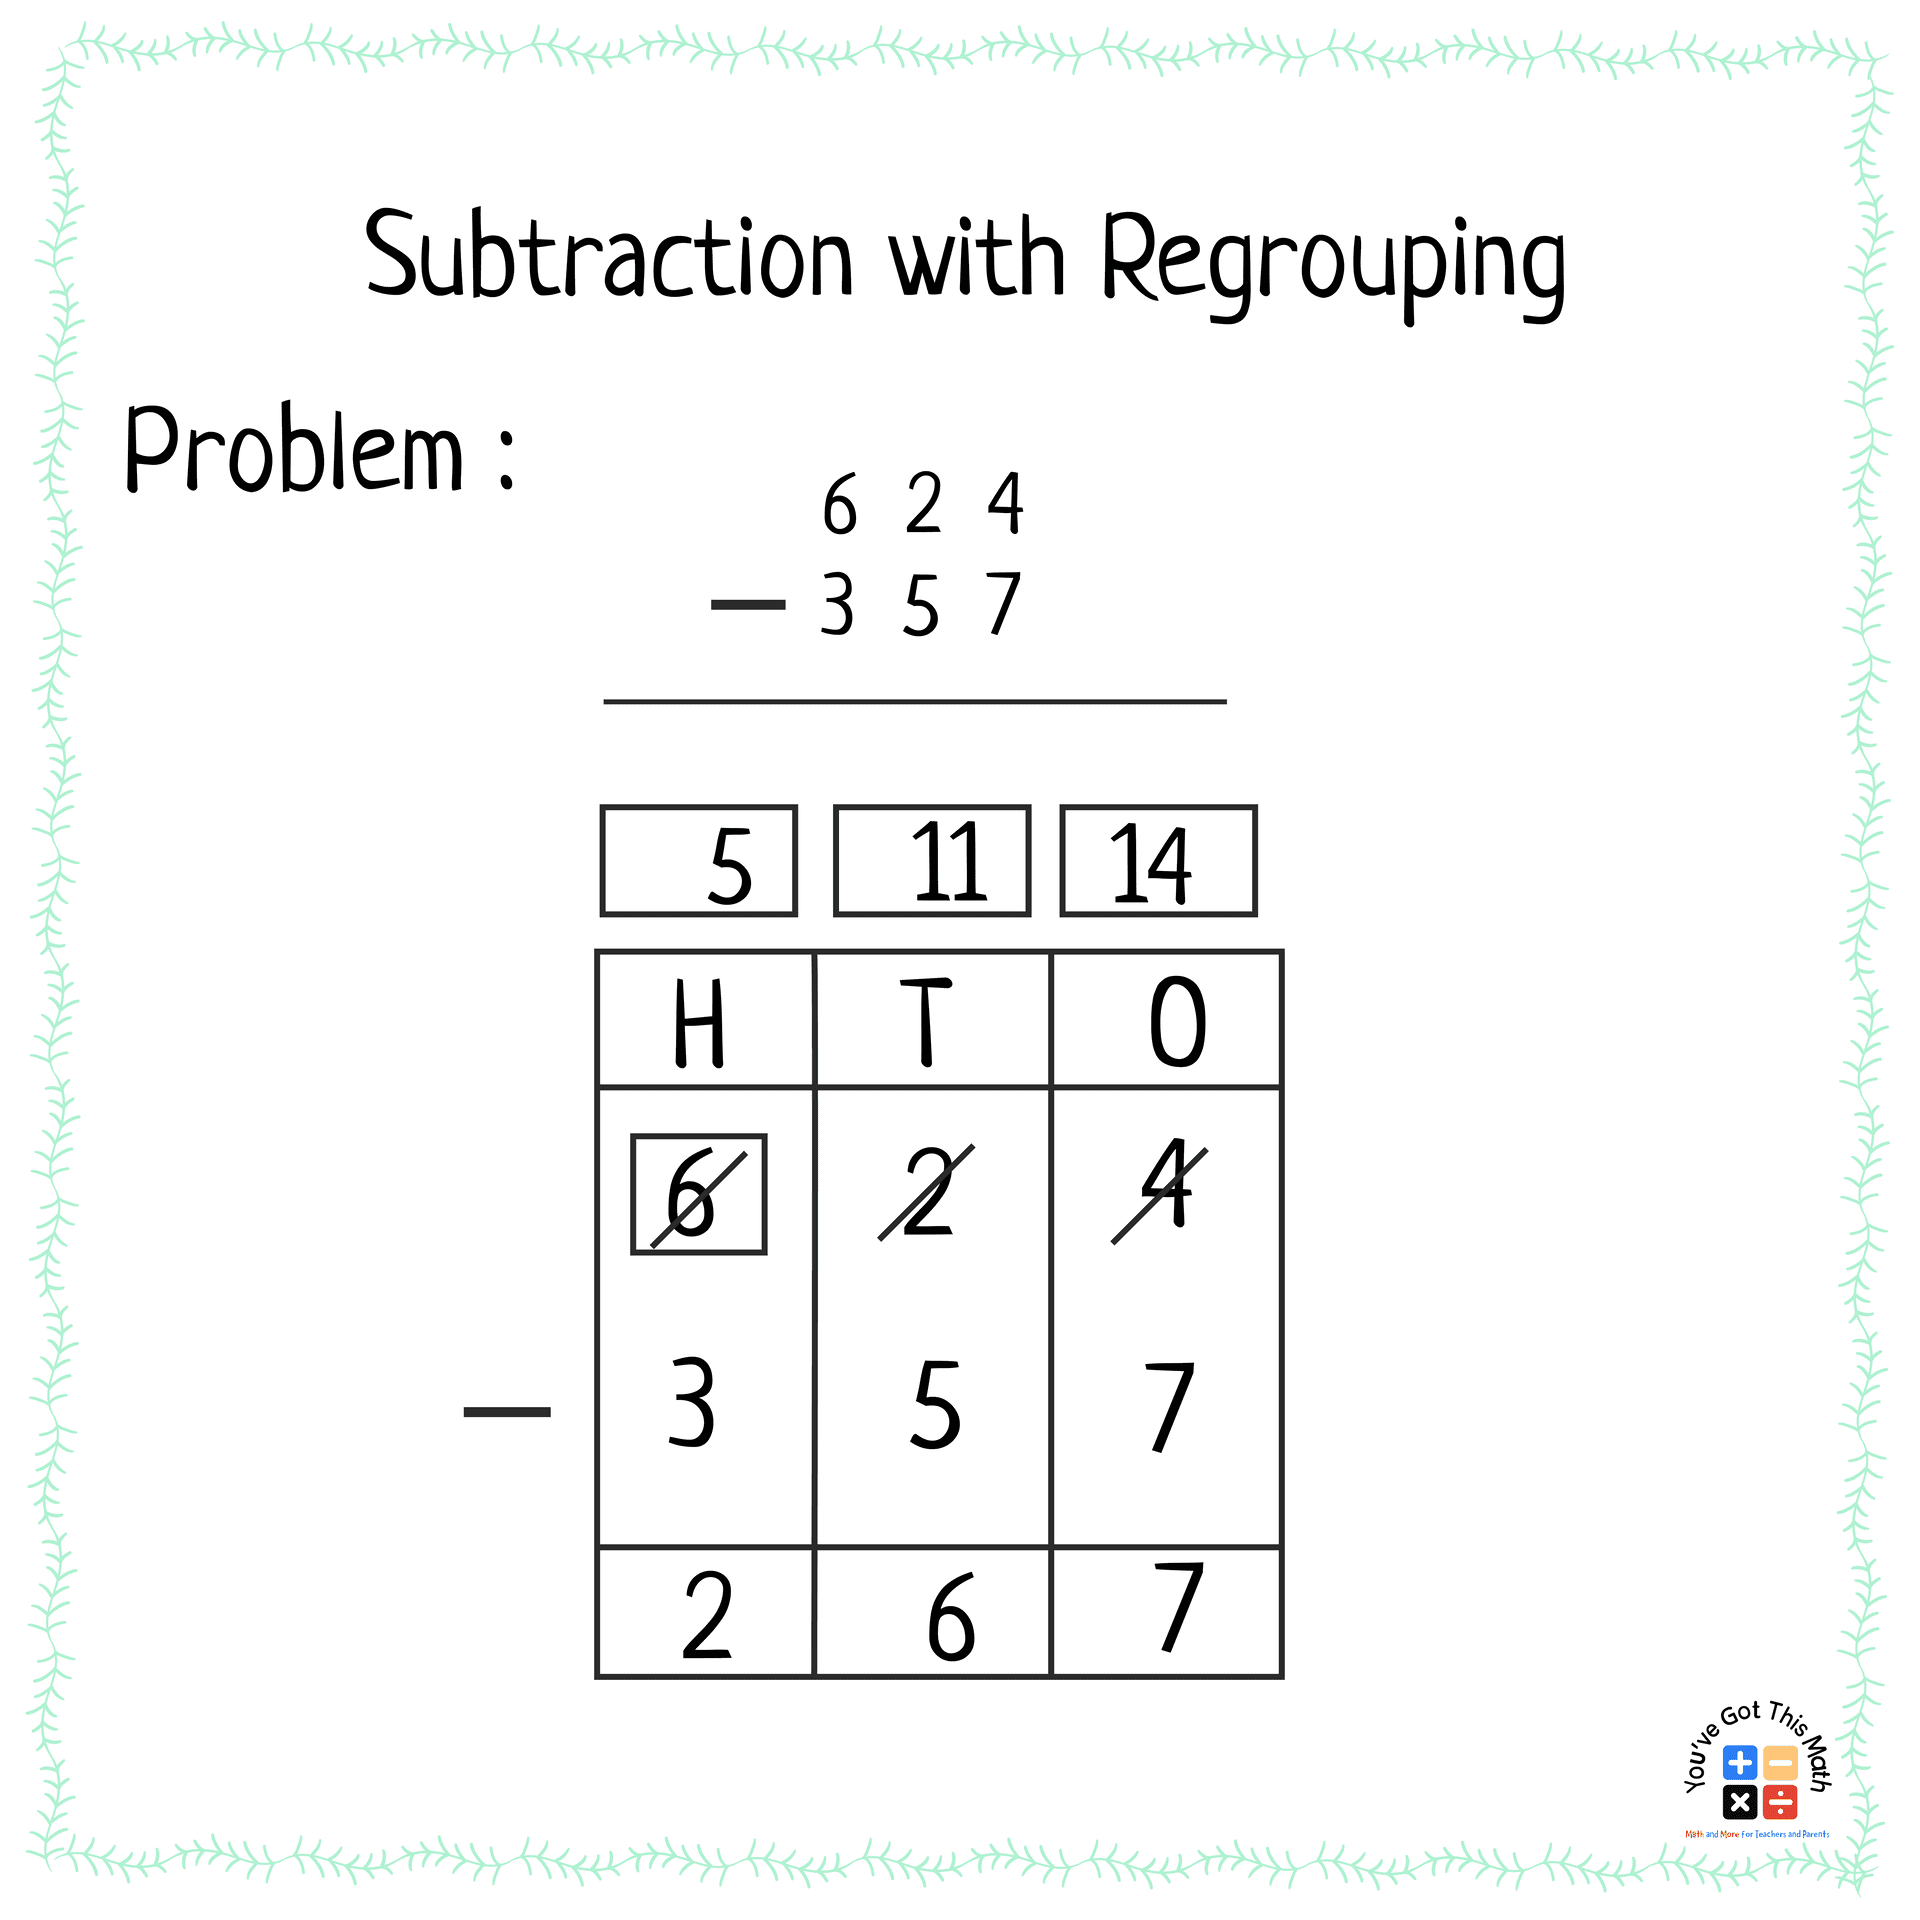 Details of Subtraction with Regrouping